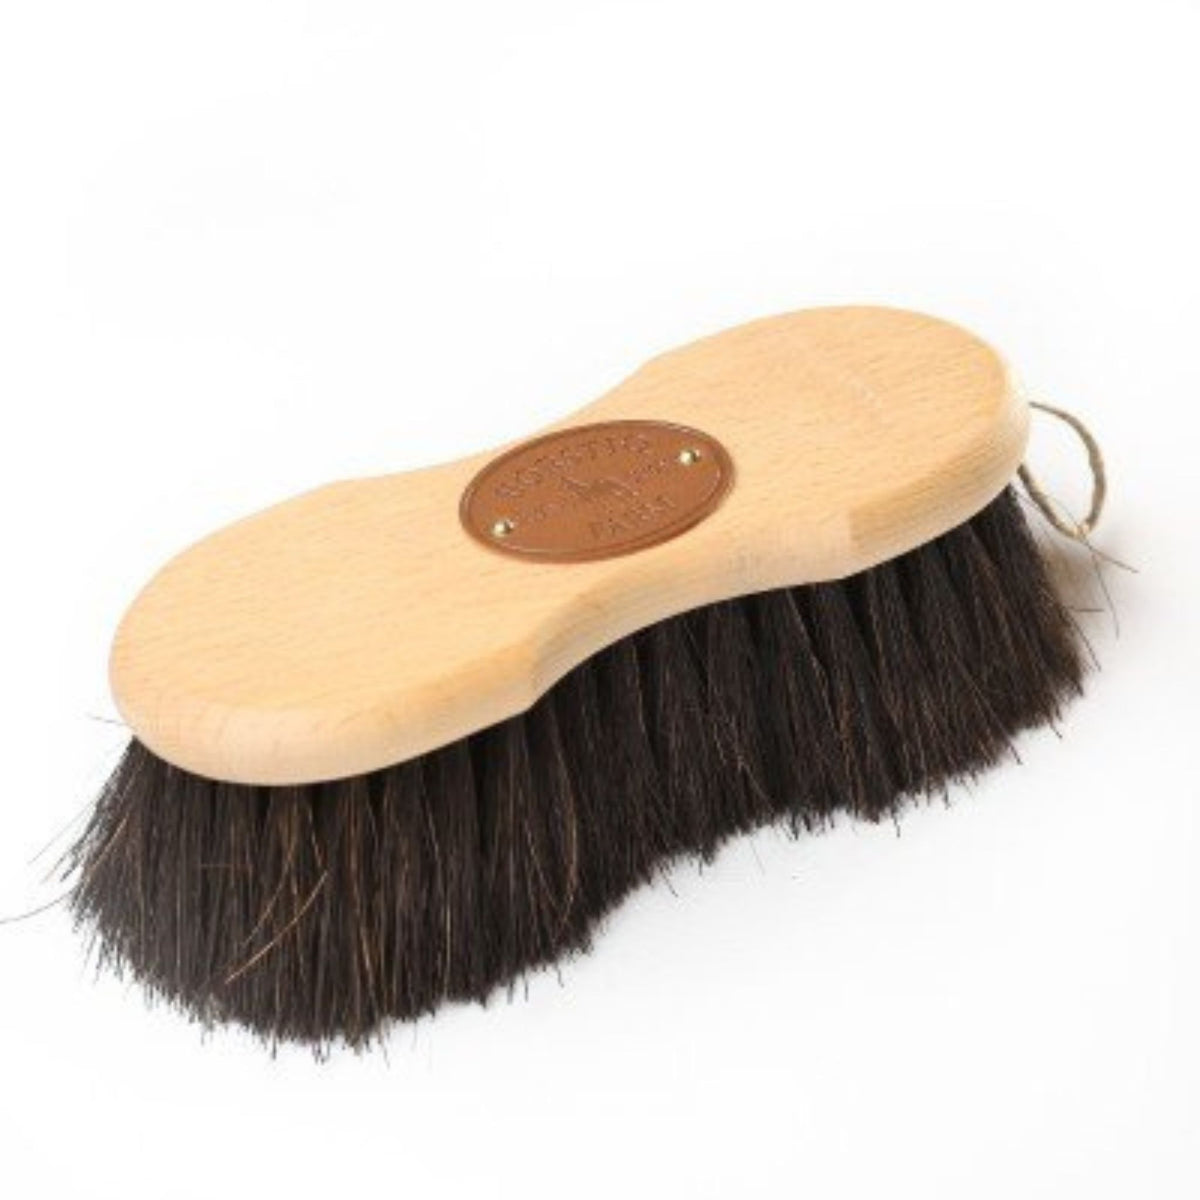 Brush with a slight hourglass shaped wooden handle with long dark brown bristles.